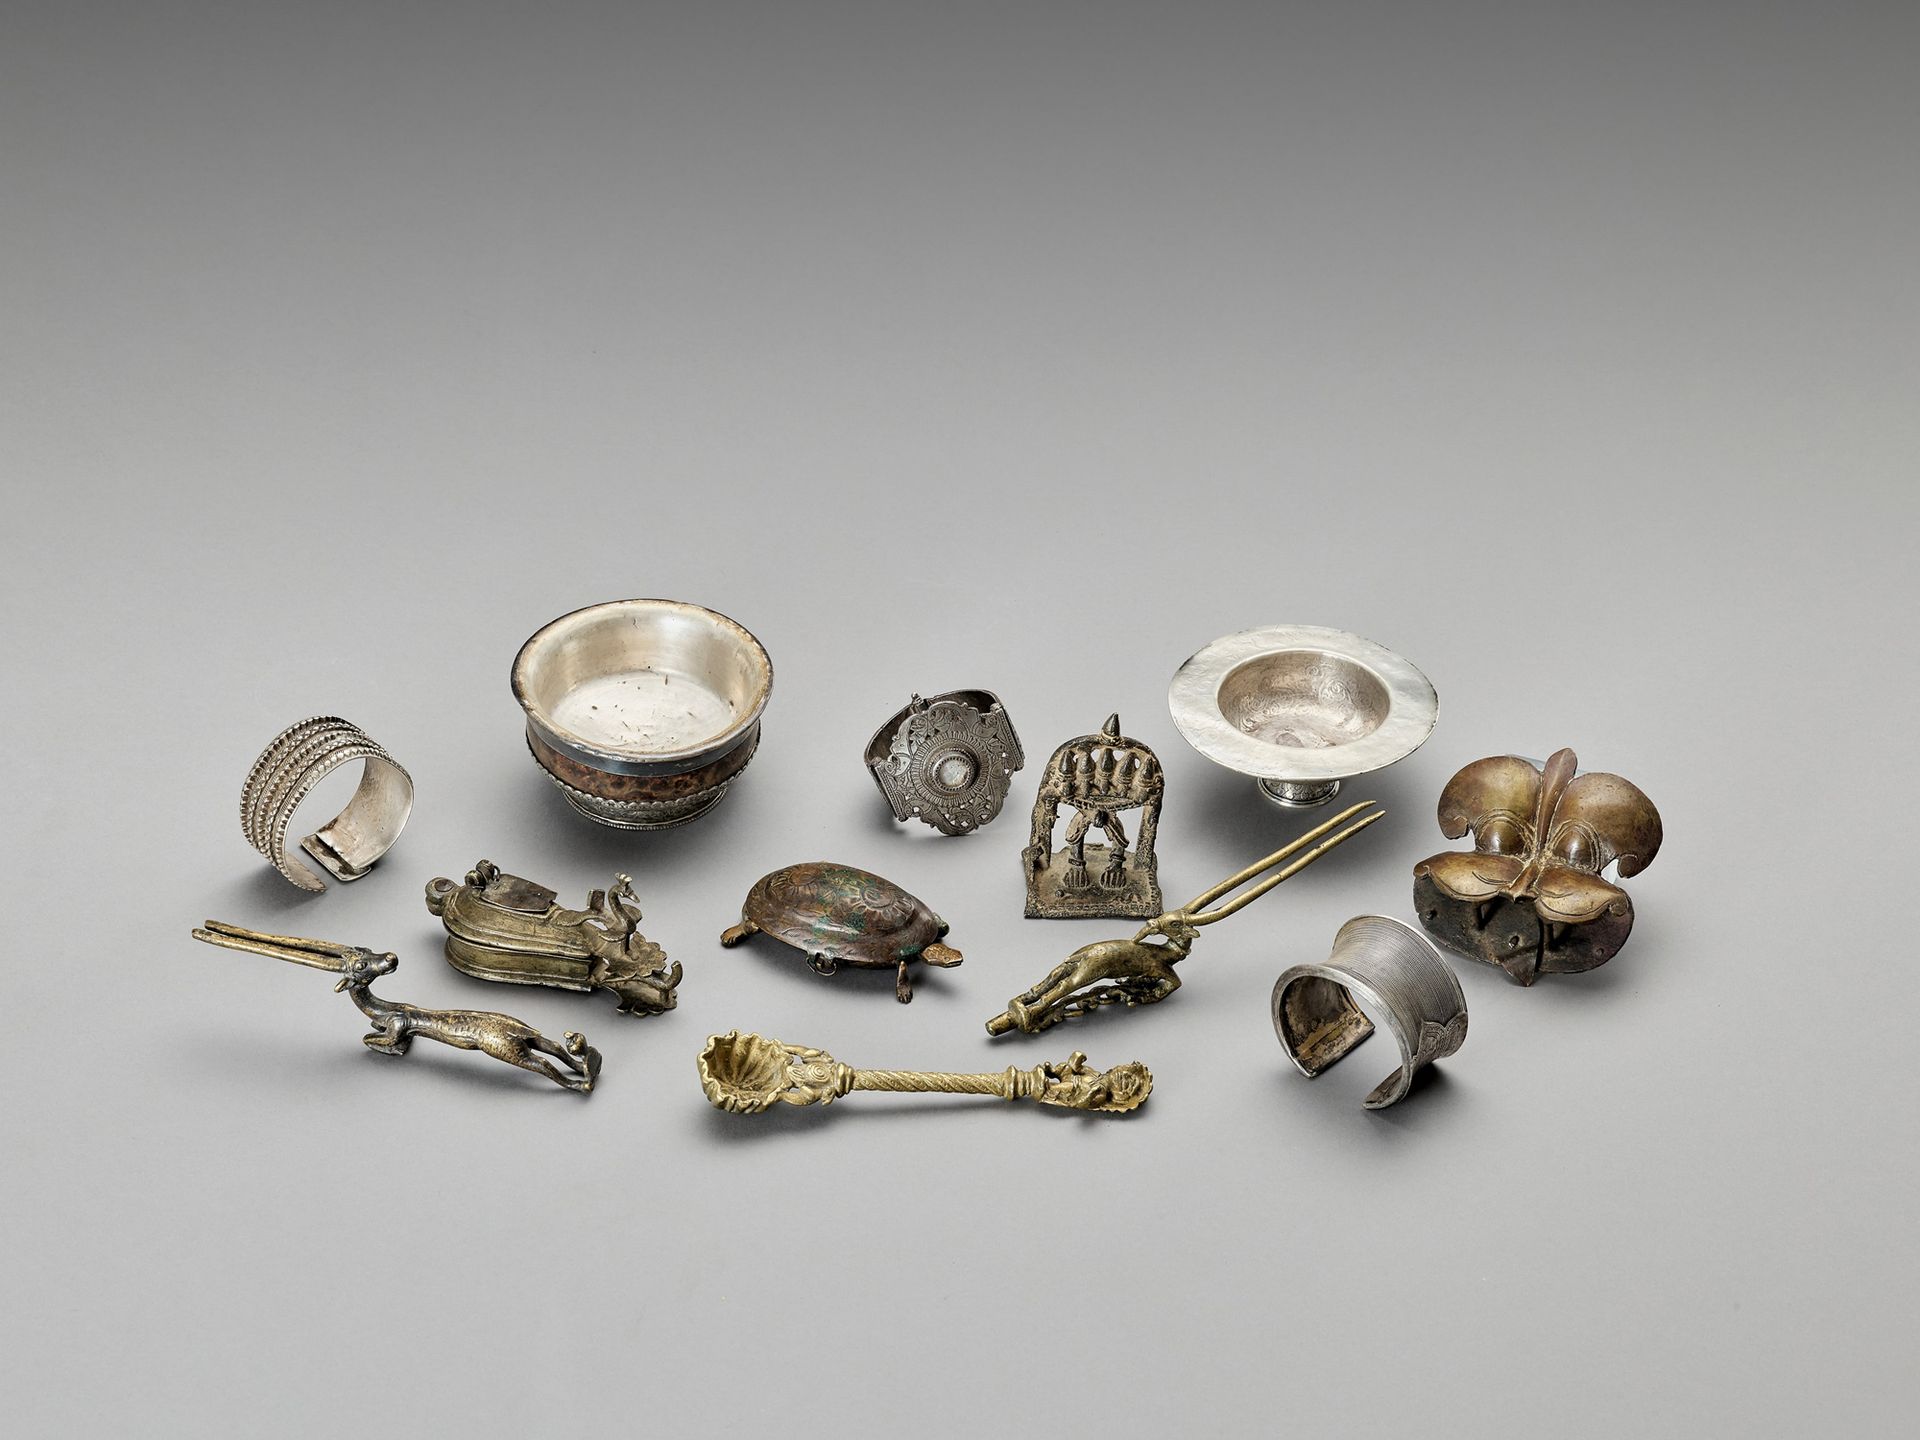 AN INTERESTING GROUP OF 12 METAL OBJECTS UN INTERESSANTE GRUPPO DI 12 OGGETTI IN&hellip;